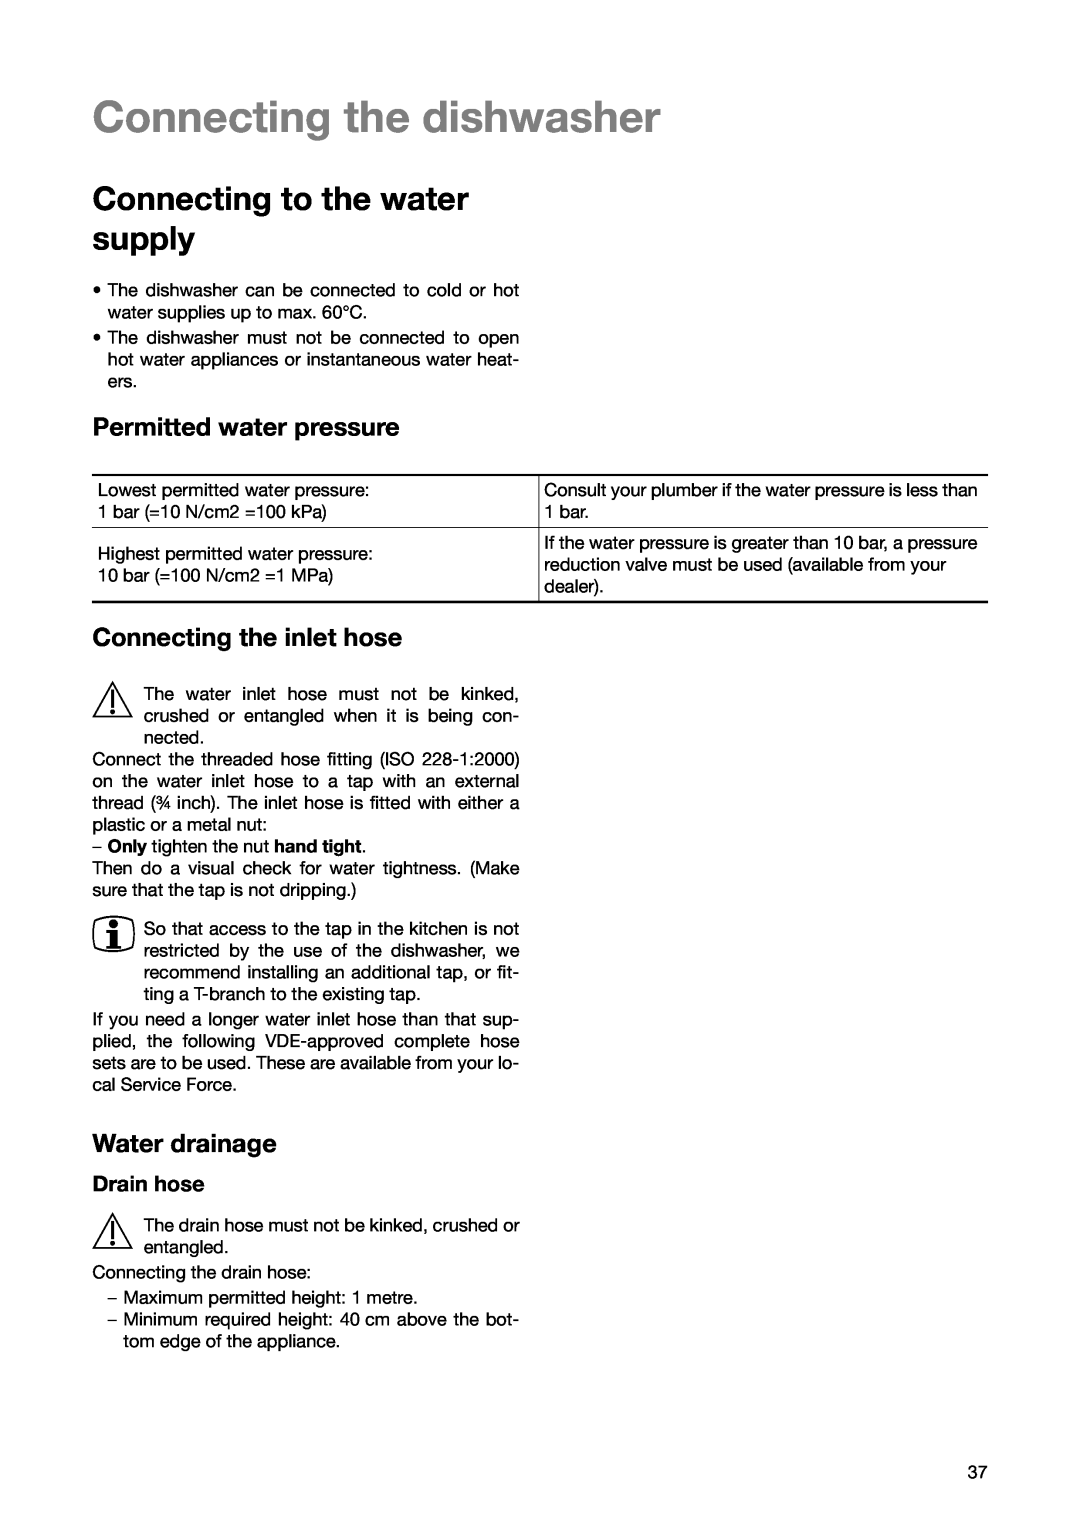 Zanussi ZSF 6171 manual Connecting the dishwasher, Connecting to the water supply, Permitted water pressure, Water drainage 